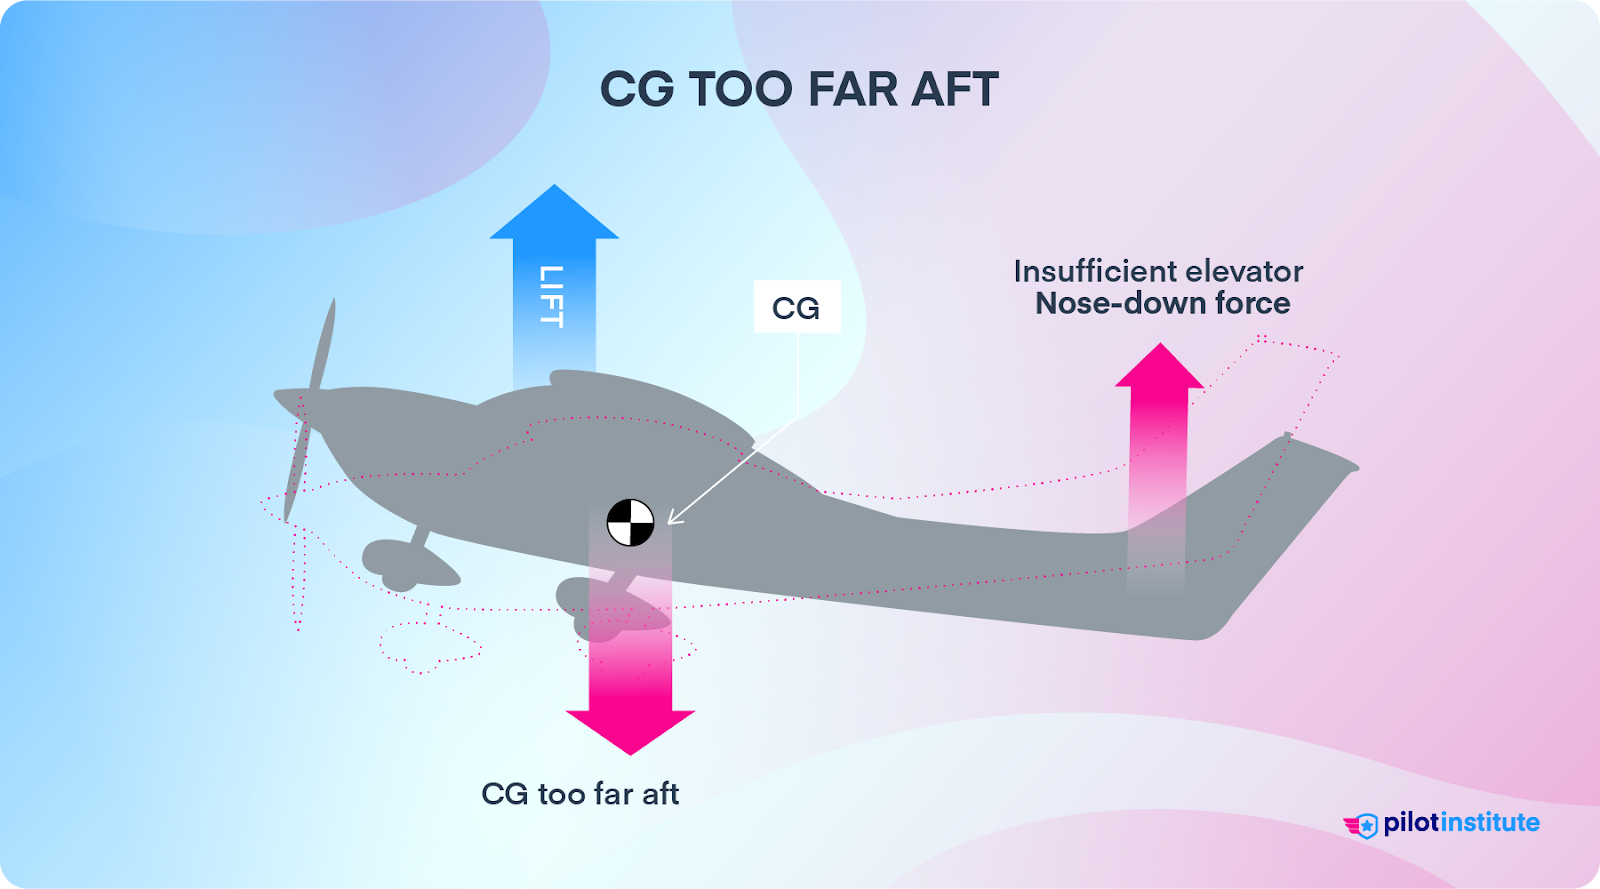 A CG too far aft results in insufficient nose-down force from the tail.